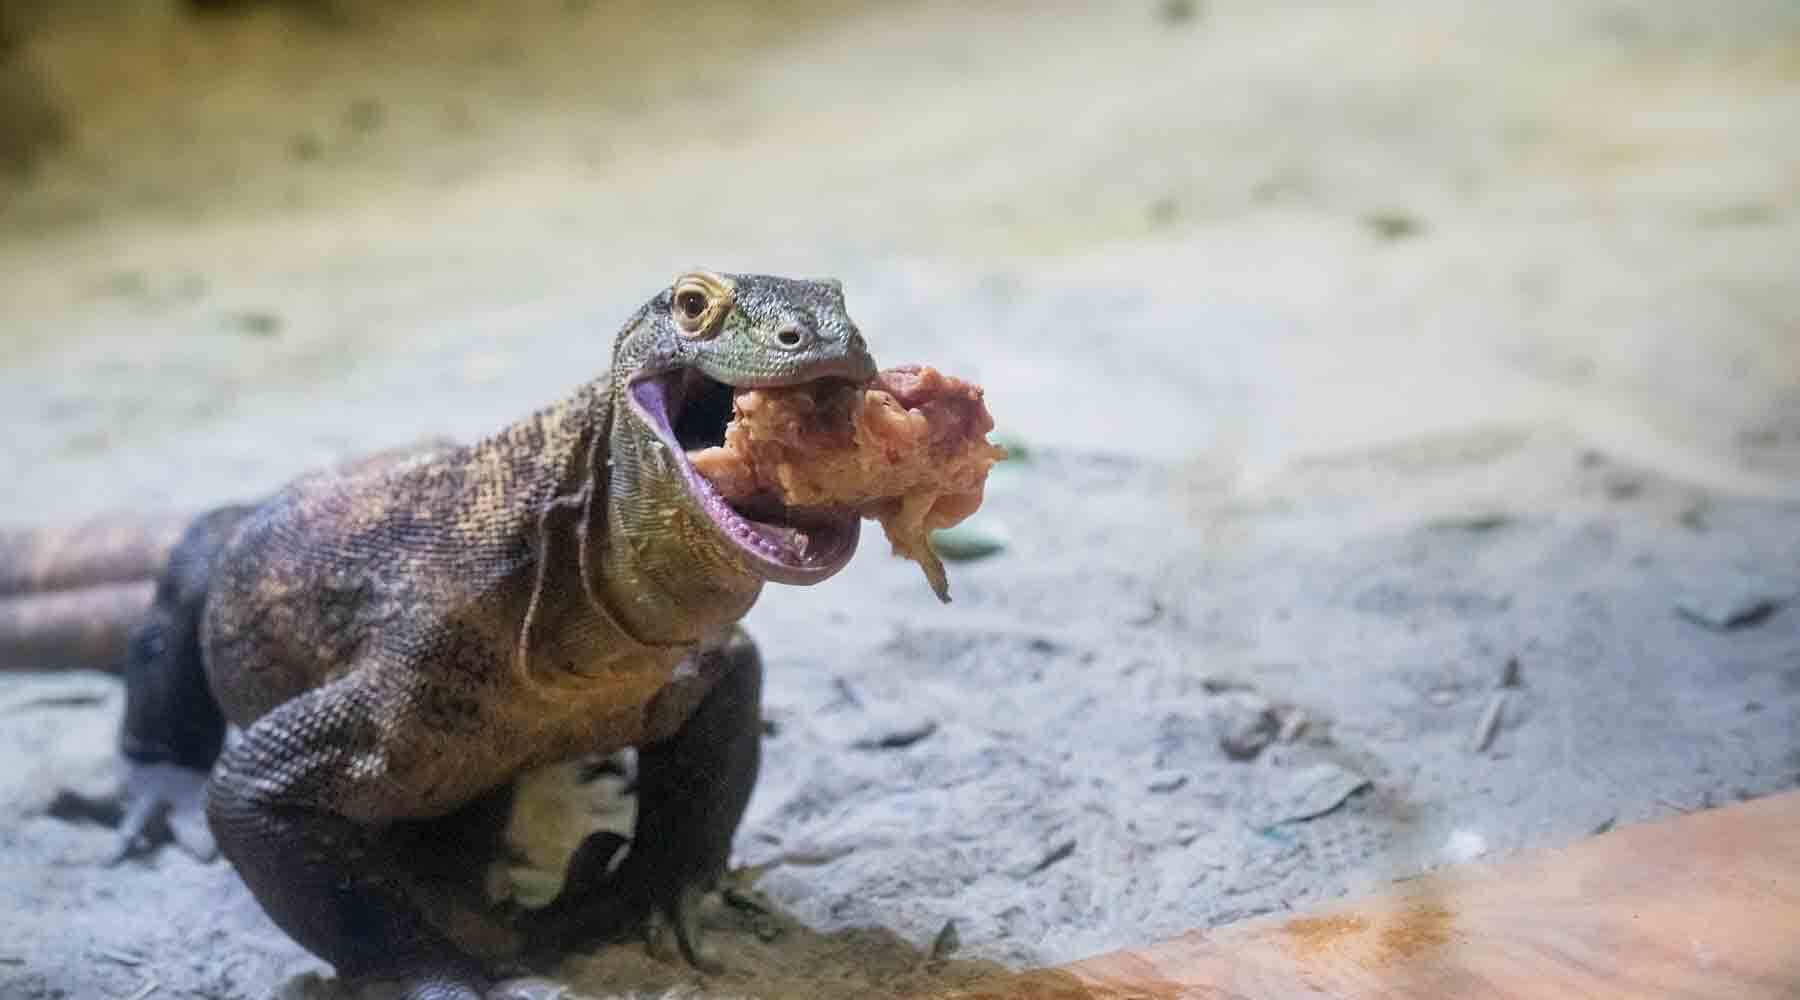 Komodo with Chicken in Mouth